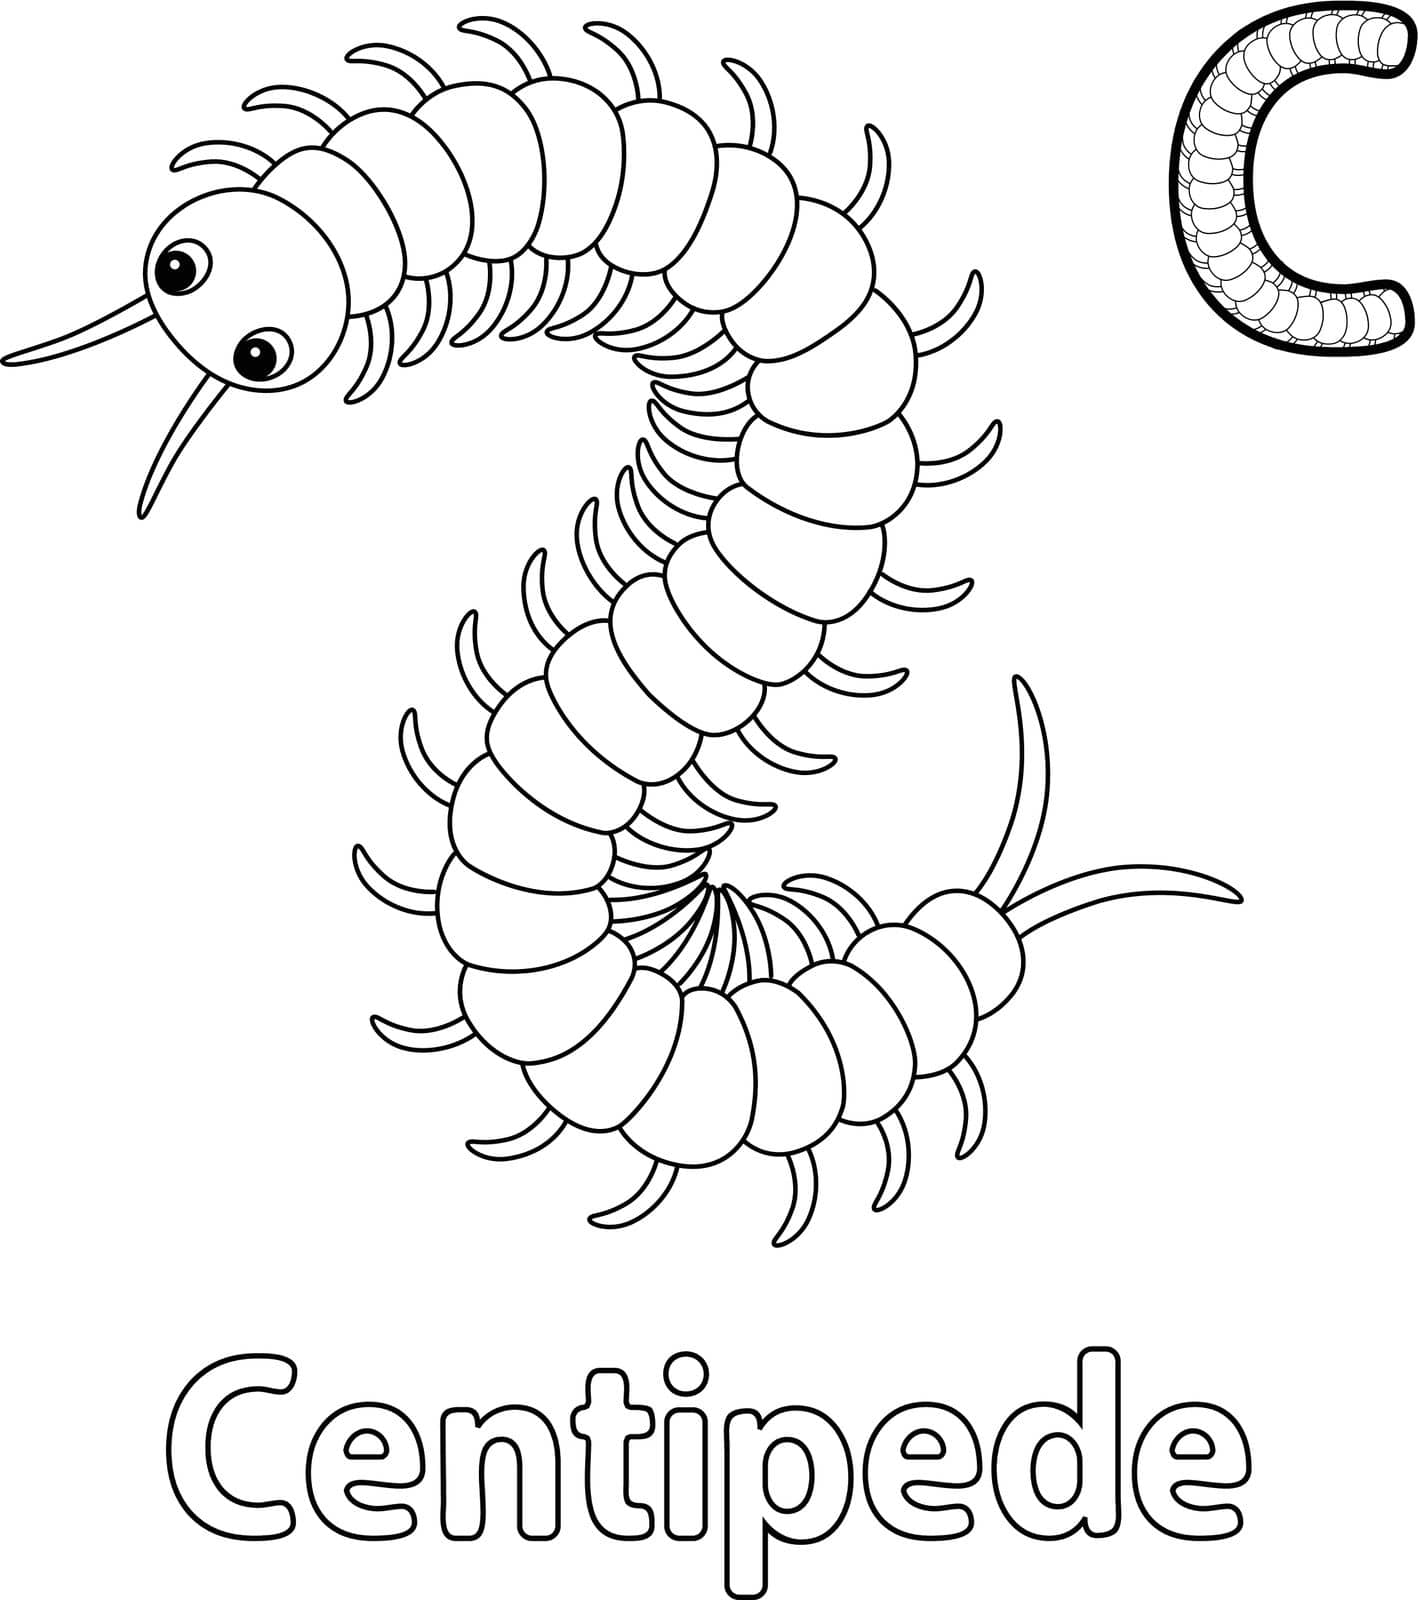 This ABC vector image shows a Centipede Animal coloring page. It is isolated on a white background. Perfect for children and elementary school students to learn the alphabet and all its letters.